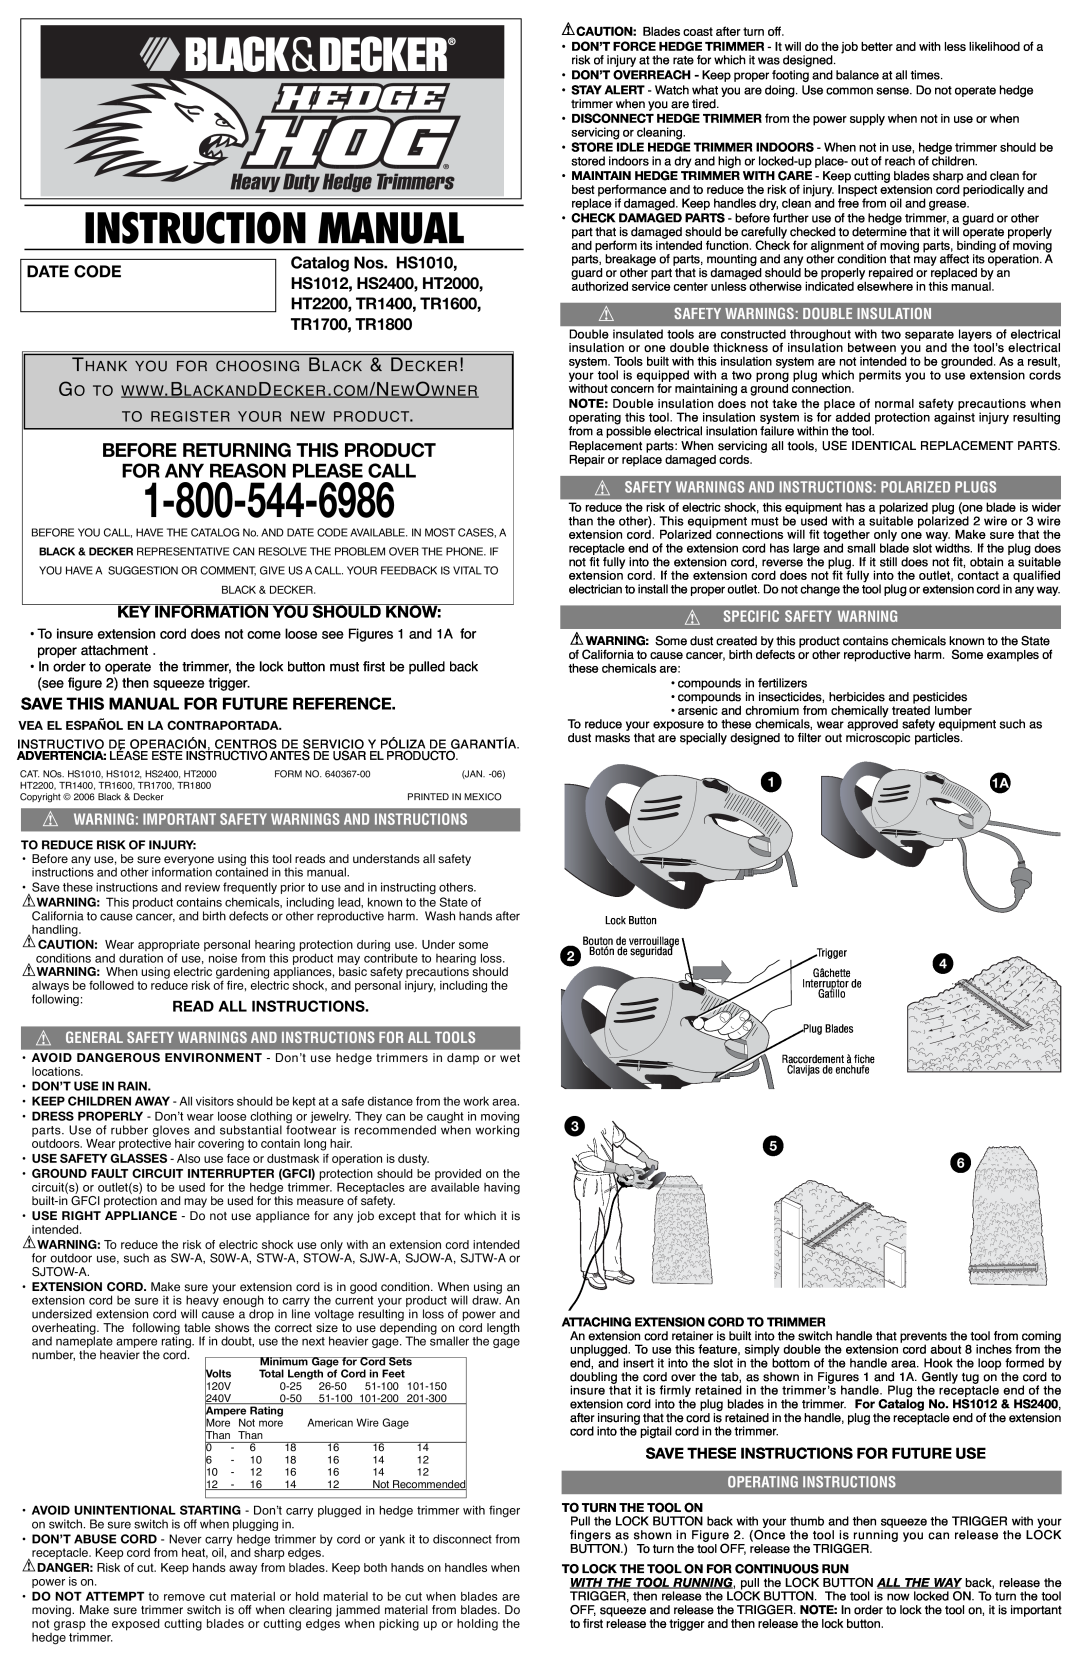 Black & Decker TR180, HS1010, TR1600 instruction manual Before Returning This Product For Any Reason Please Call, Date Code 